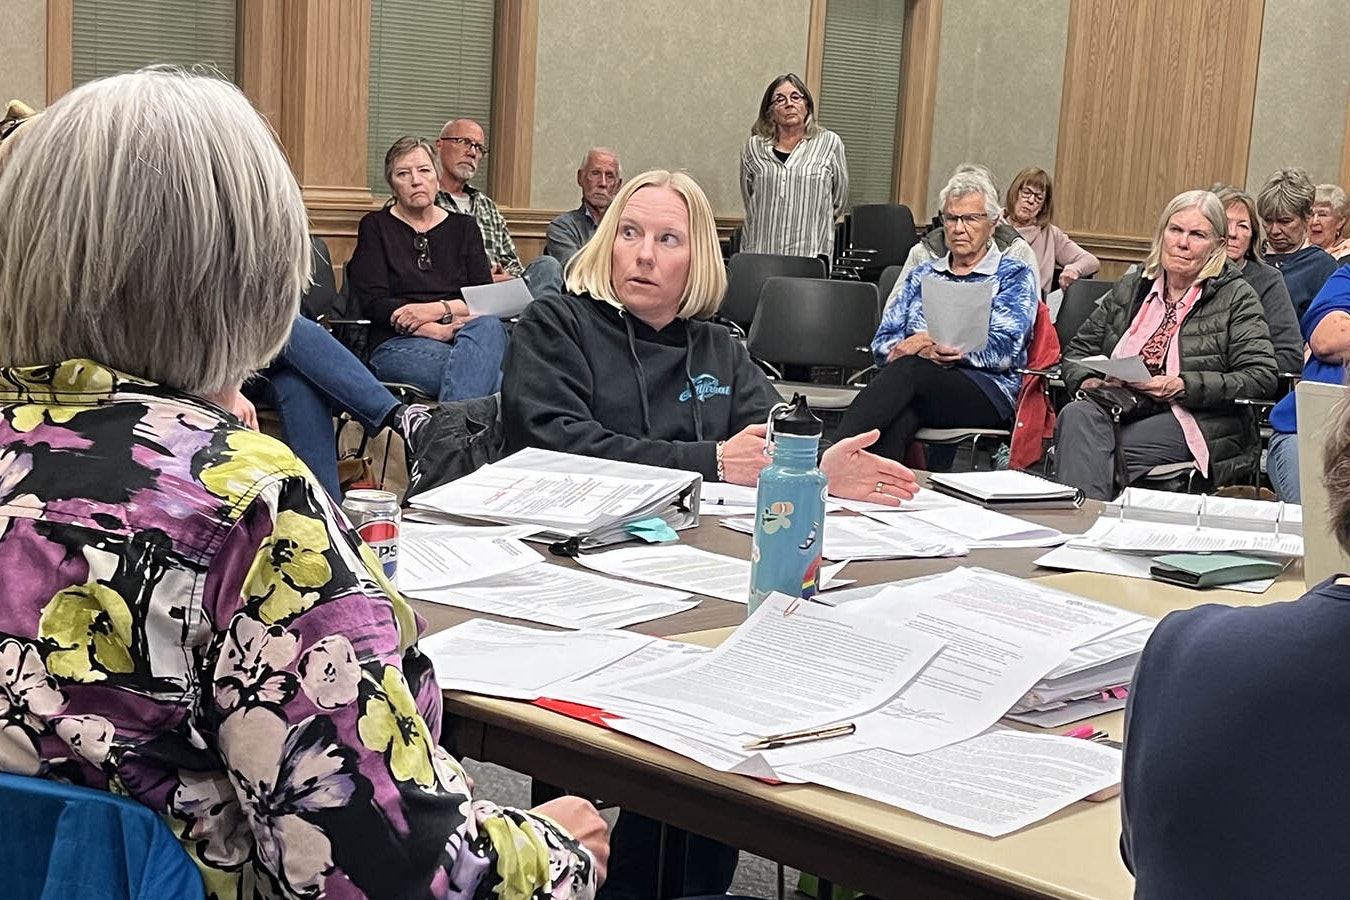 Fremont County Library Board Chair Carrie Johnson, back-facing, and board member Kristen McClelland, center, sparred over whether the library should implement parental checkout restrictions.